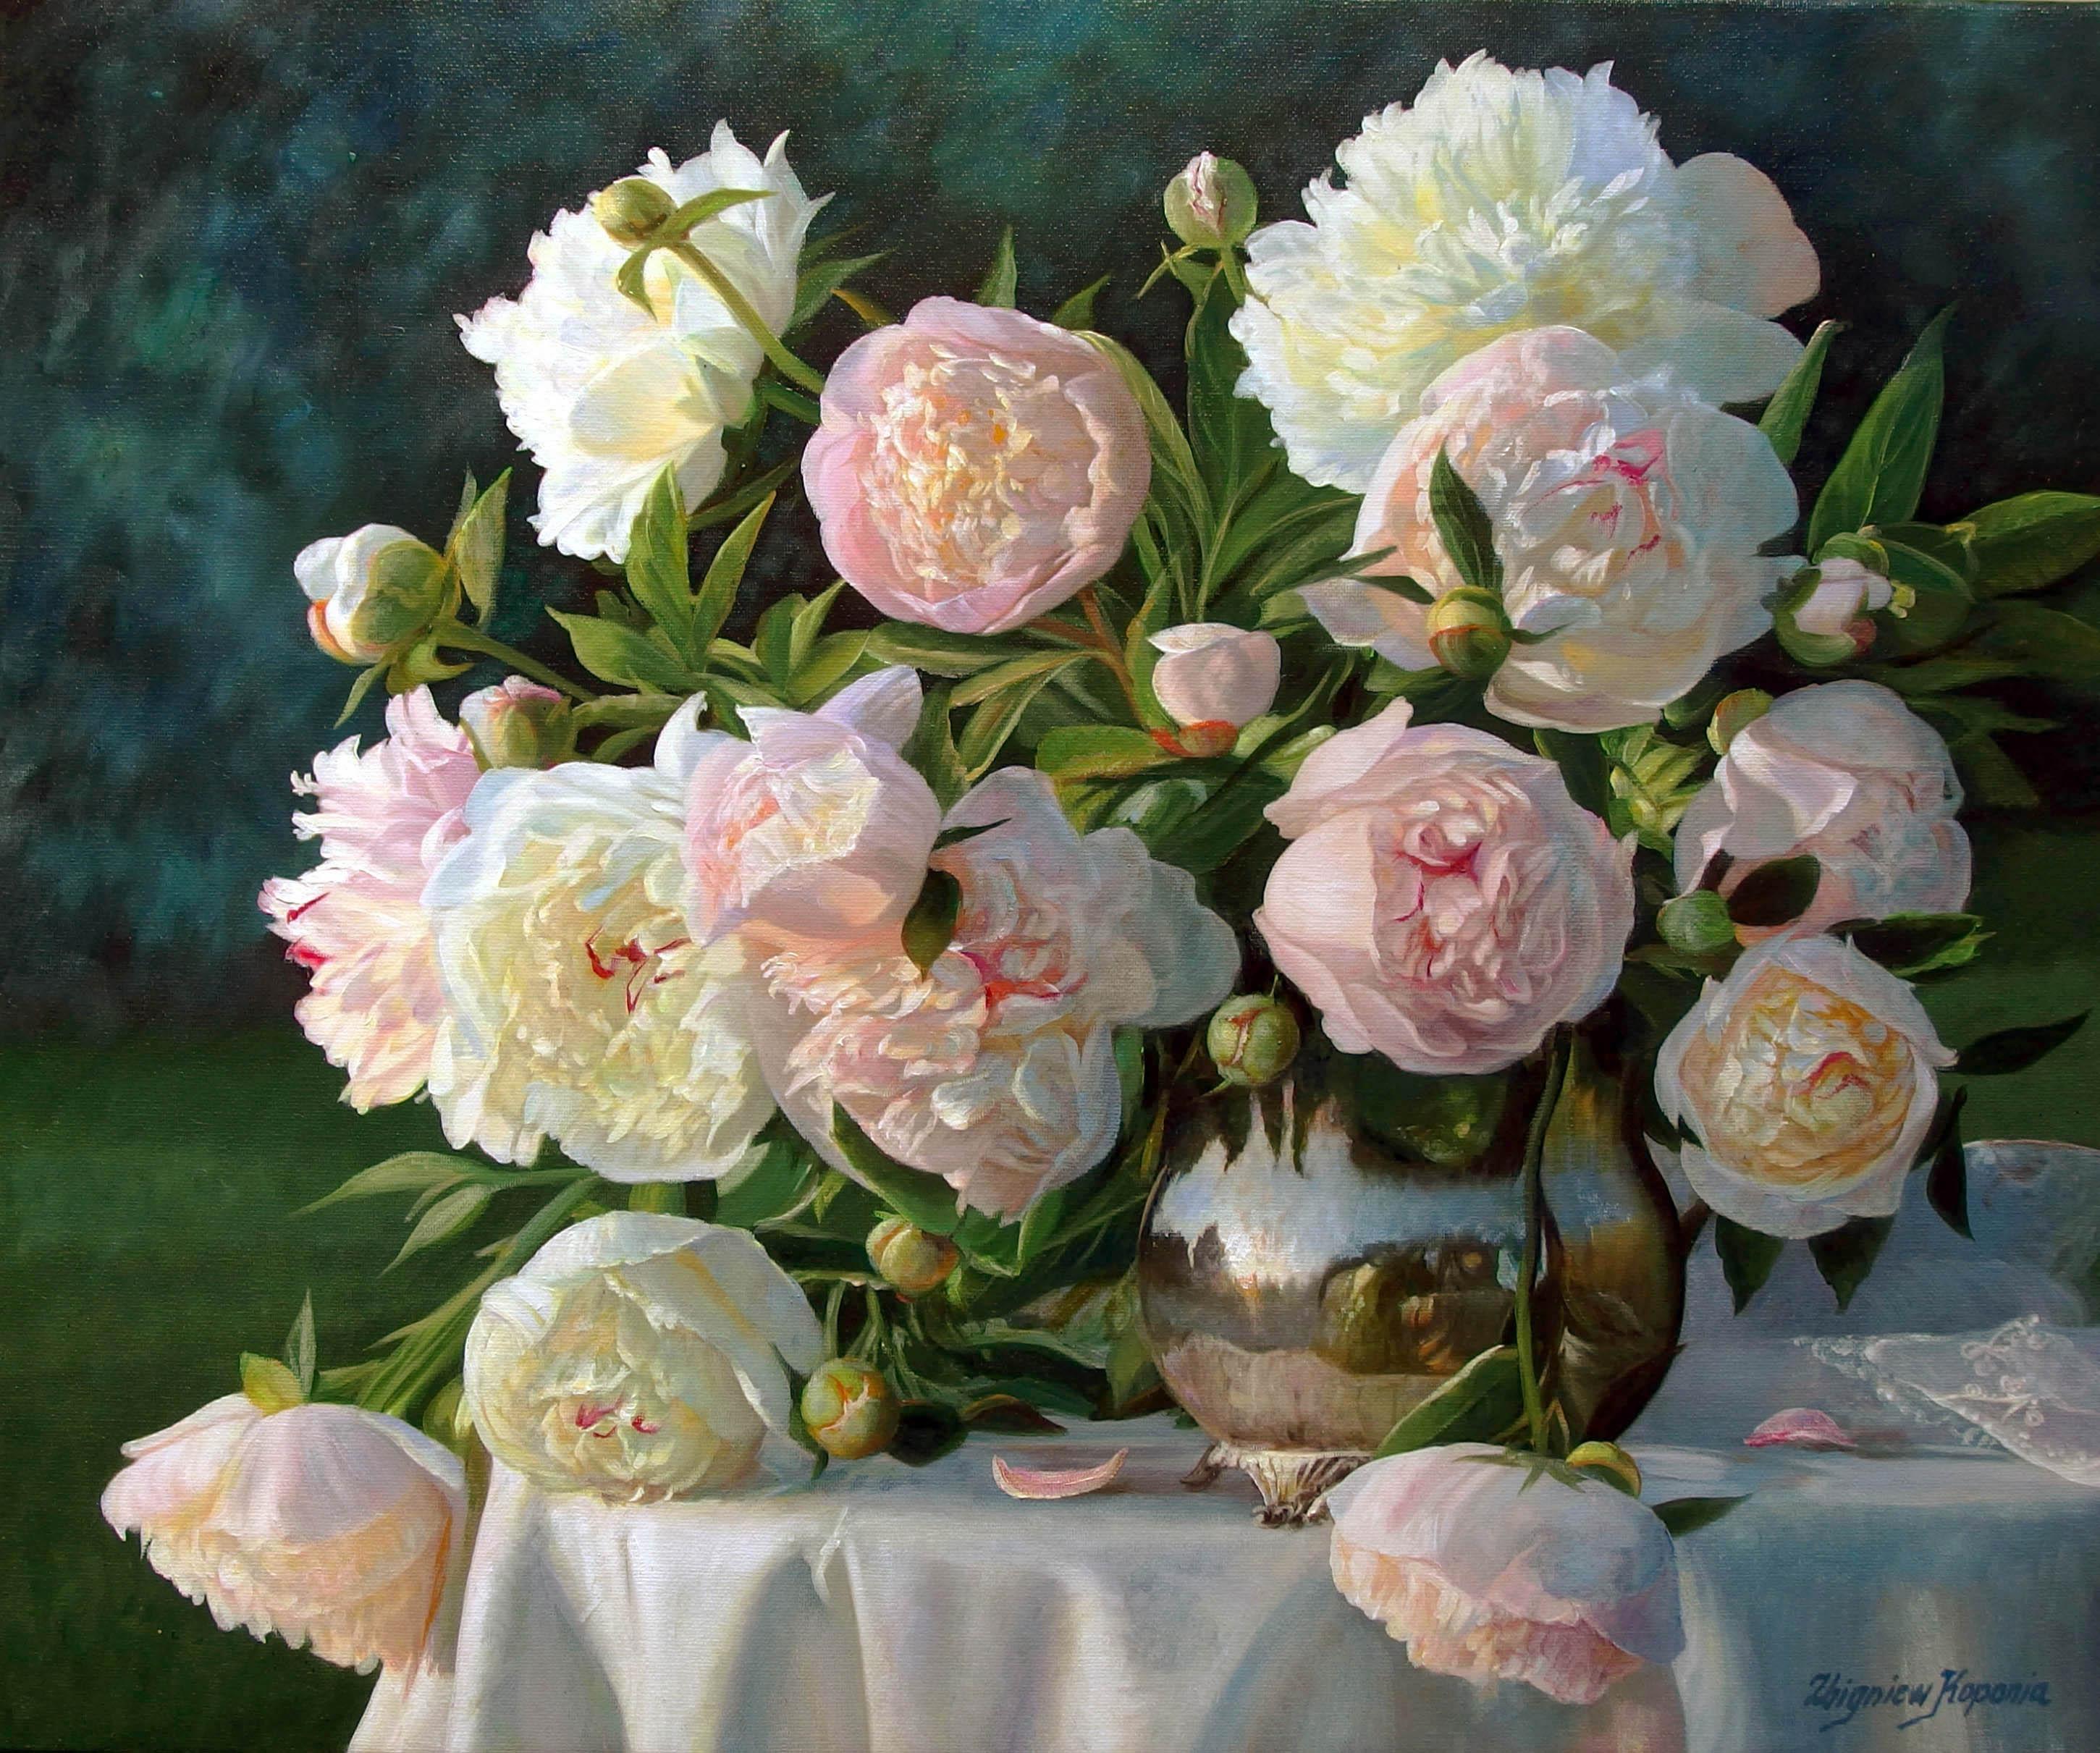  Still Life Peonies in a Silver Vase Contemporary Realism - Painting by Zbigniew Kopania